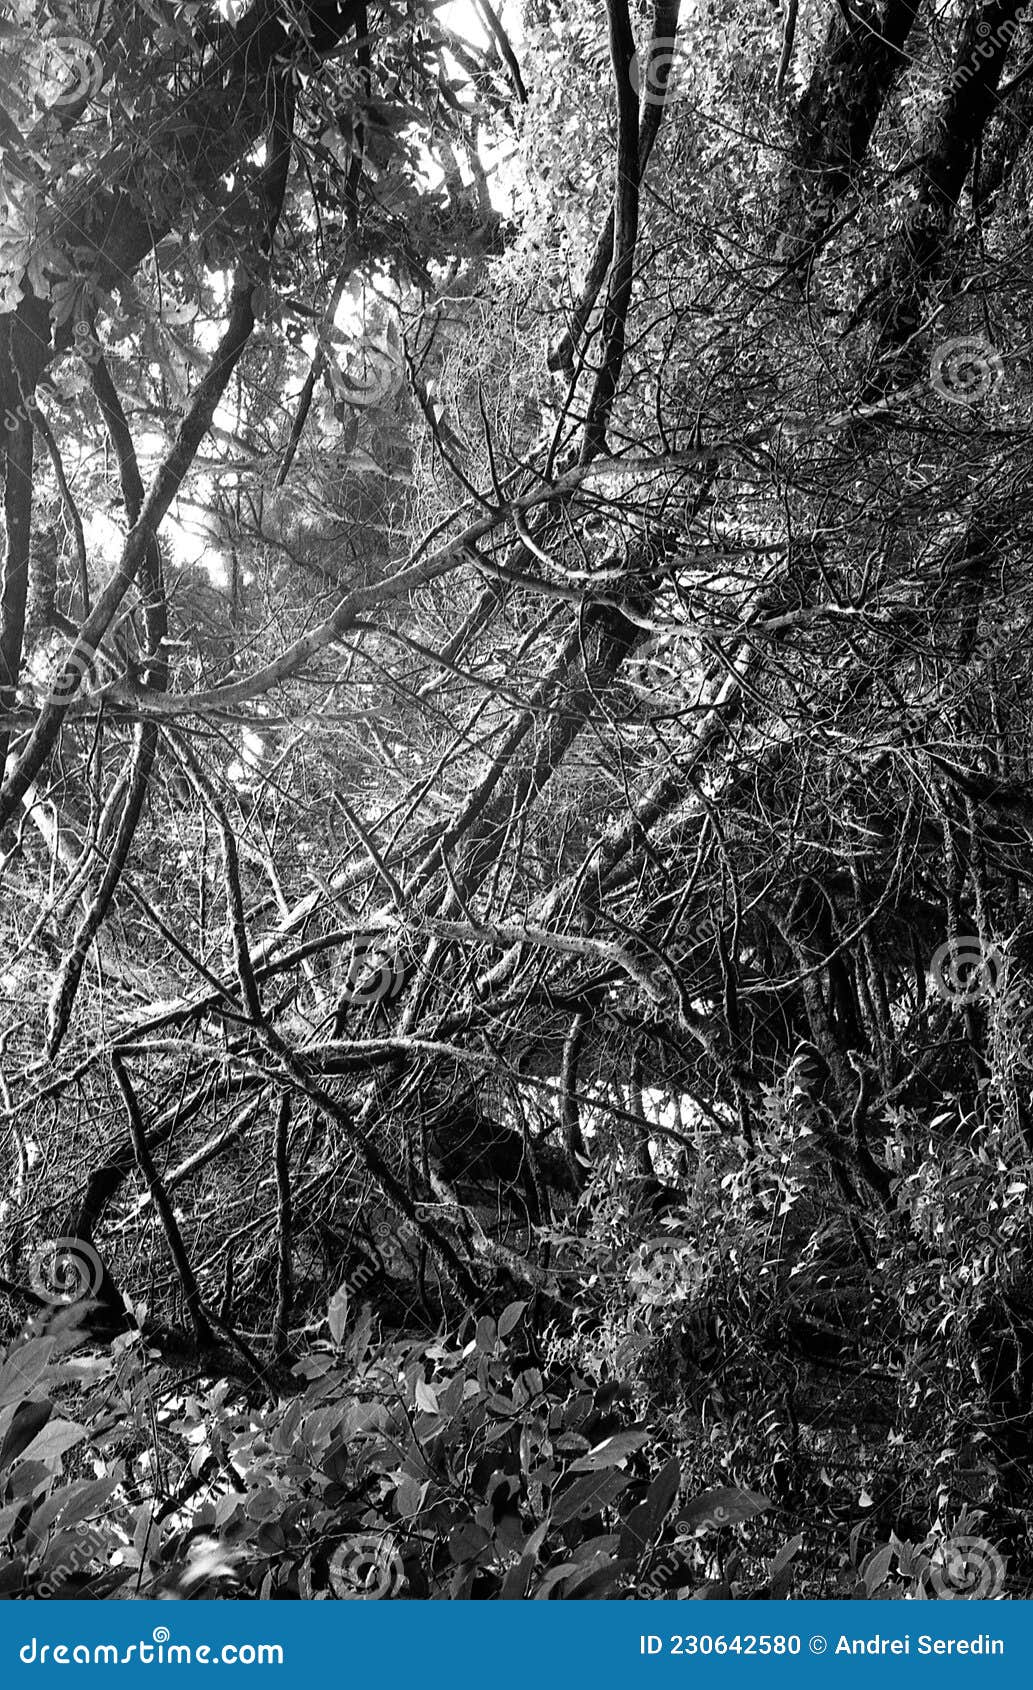 forests of costa rica in black and white film 09